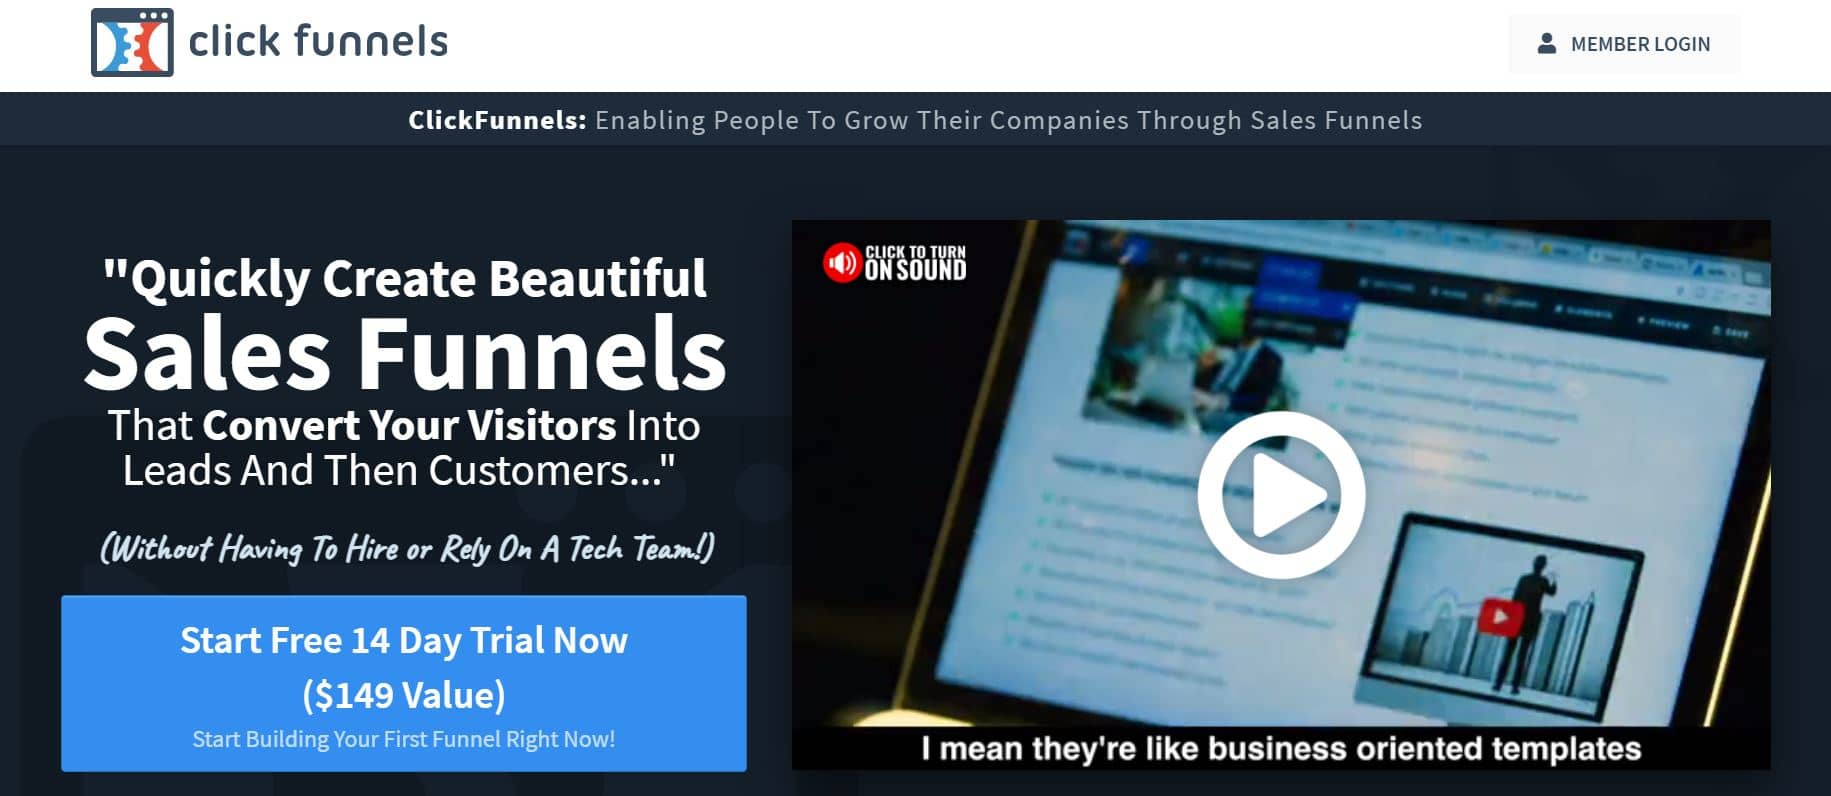 ClickFunnels is one of th ebest sales funnel tools